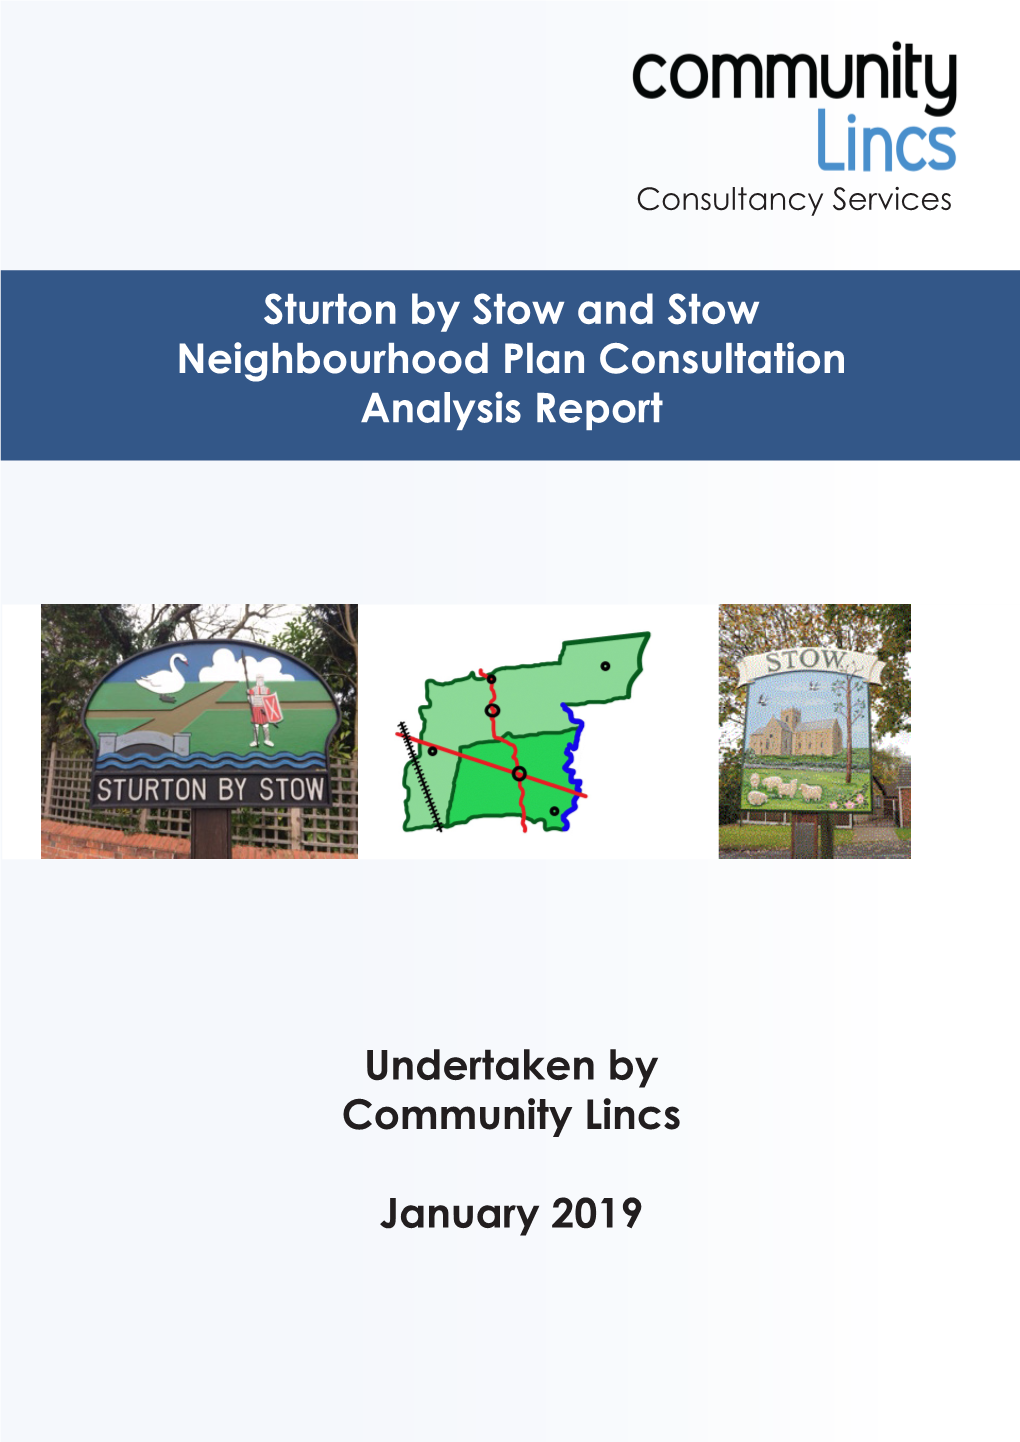 Sturton by Stow and Stow Neighbourhood Plan Consultation Analysis Report